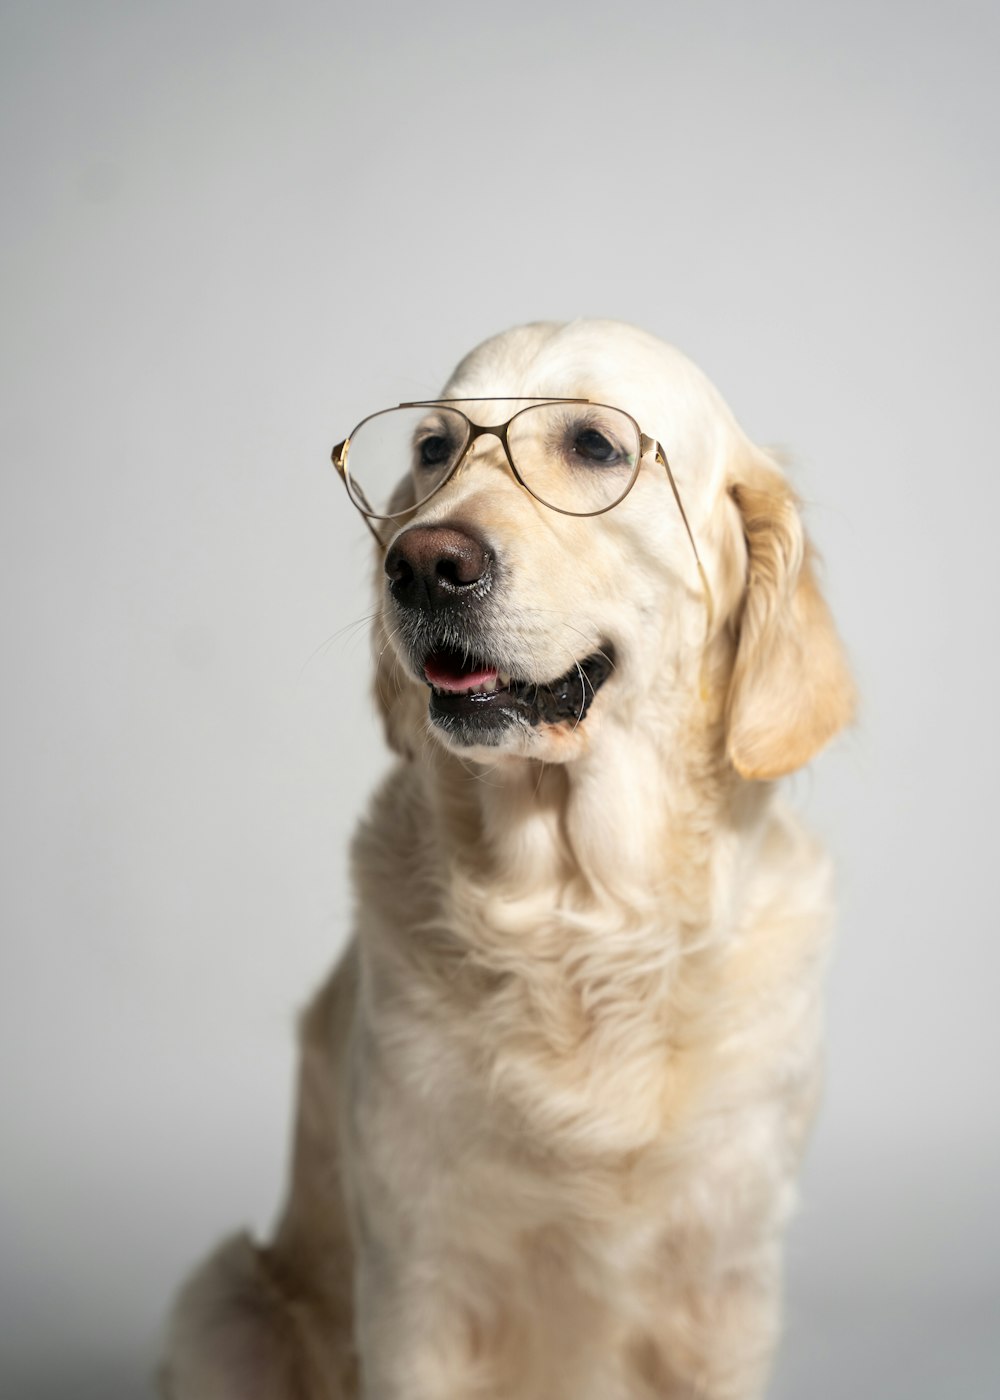  a dog wearing glasses and a bow tie